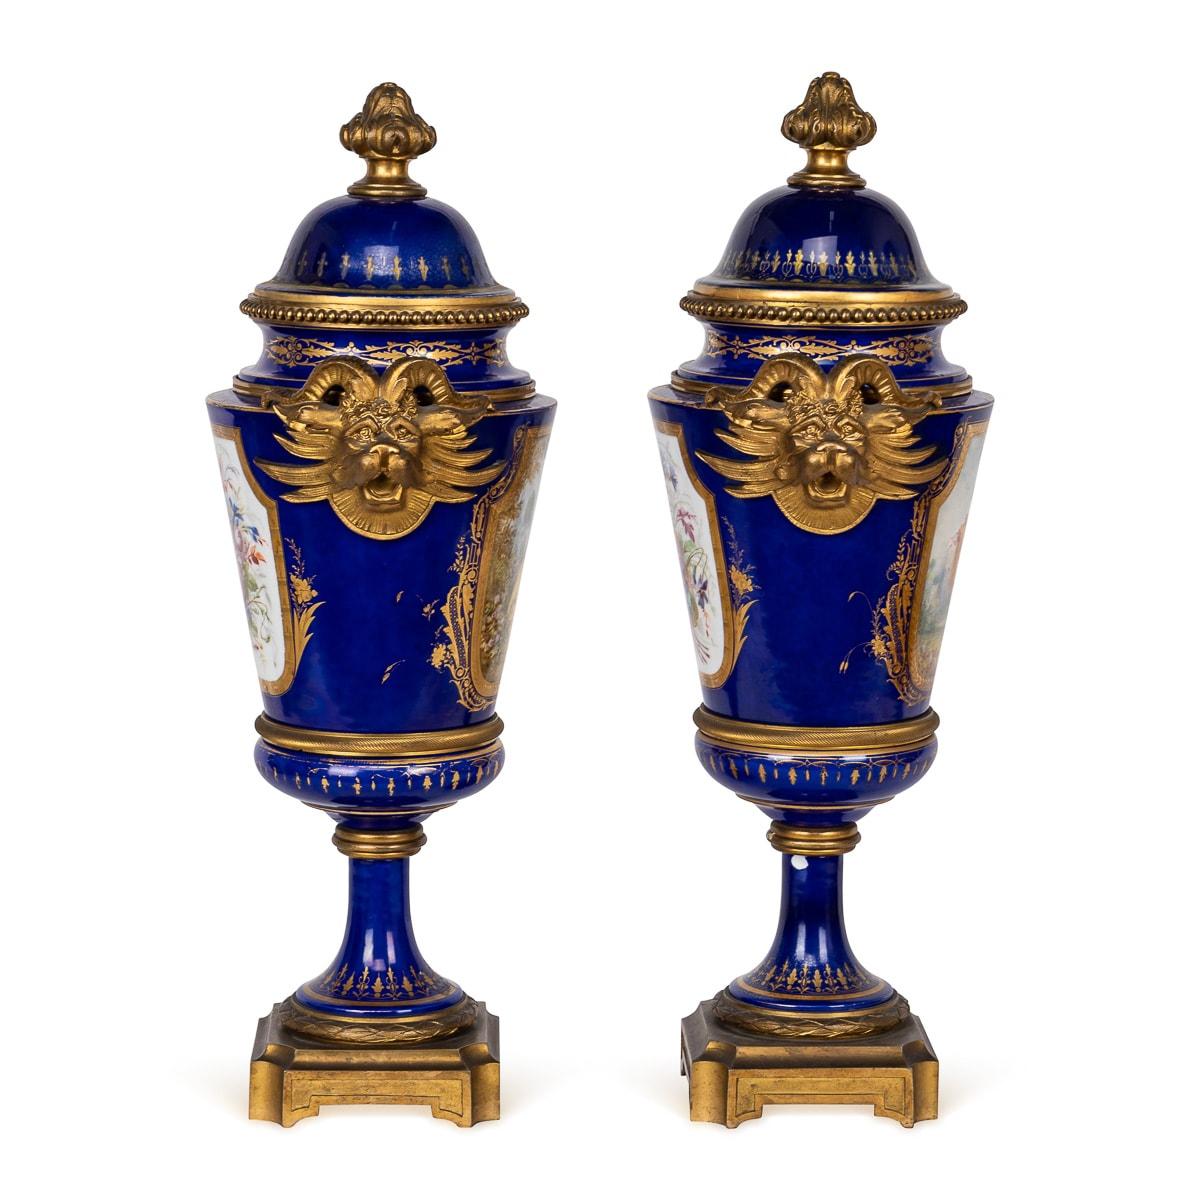 Antique 19th Century Sèvres Ormolu Mounted Vases With Covers c.1870 In Good Condition For Sale In Royal Tunbridge Wells, Kent